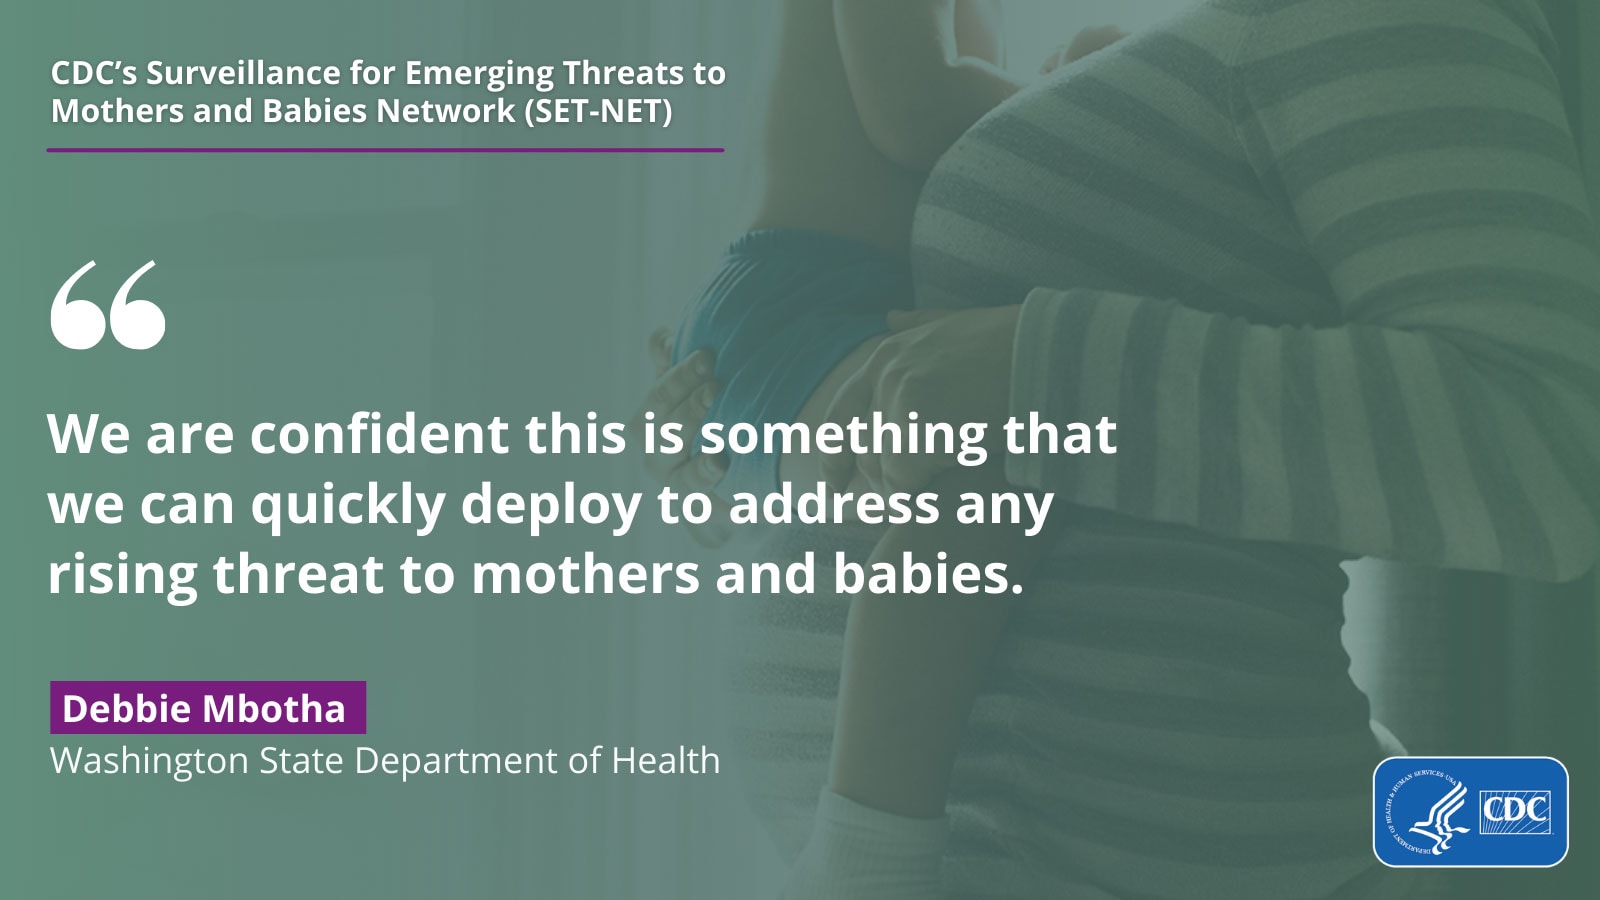 We are confident this is something that we can quickly deploy to address any rising threat to mothers and babies. -Debbie Mbotha Washington State Department of Health